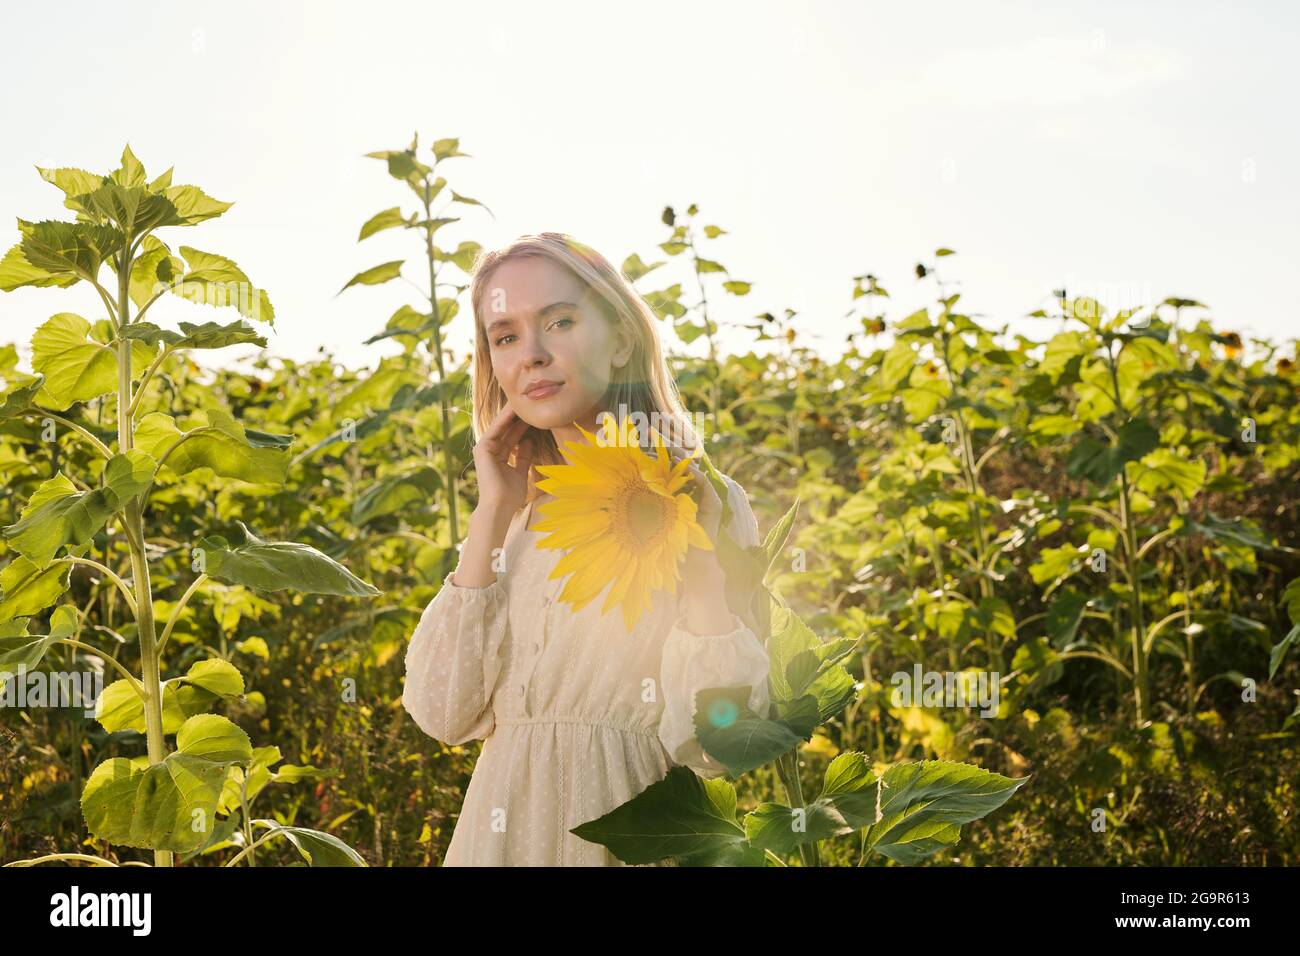 Beautiful young blond woman in white country style dress standing in front of camera against sunflower field and looking at one of yellow flowers Stock Photo